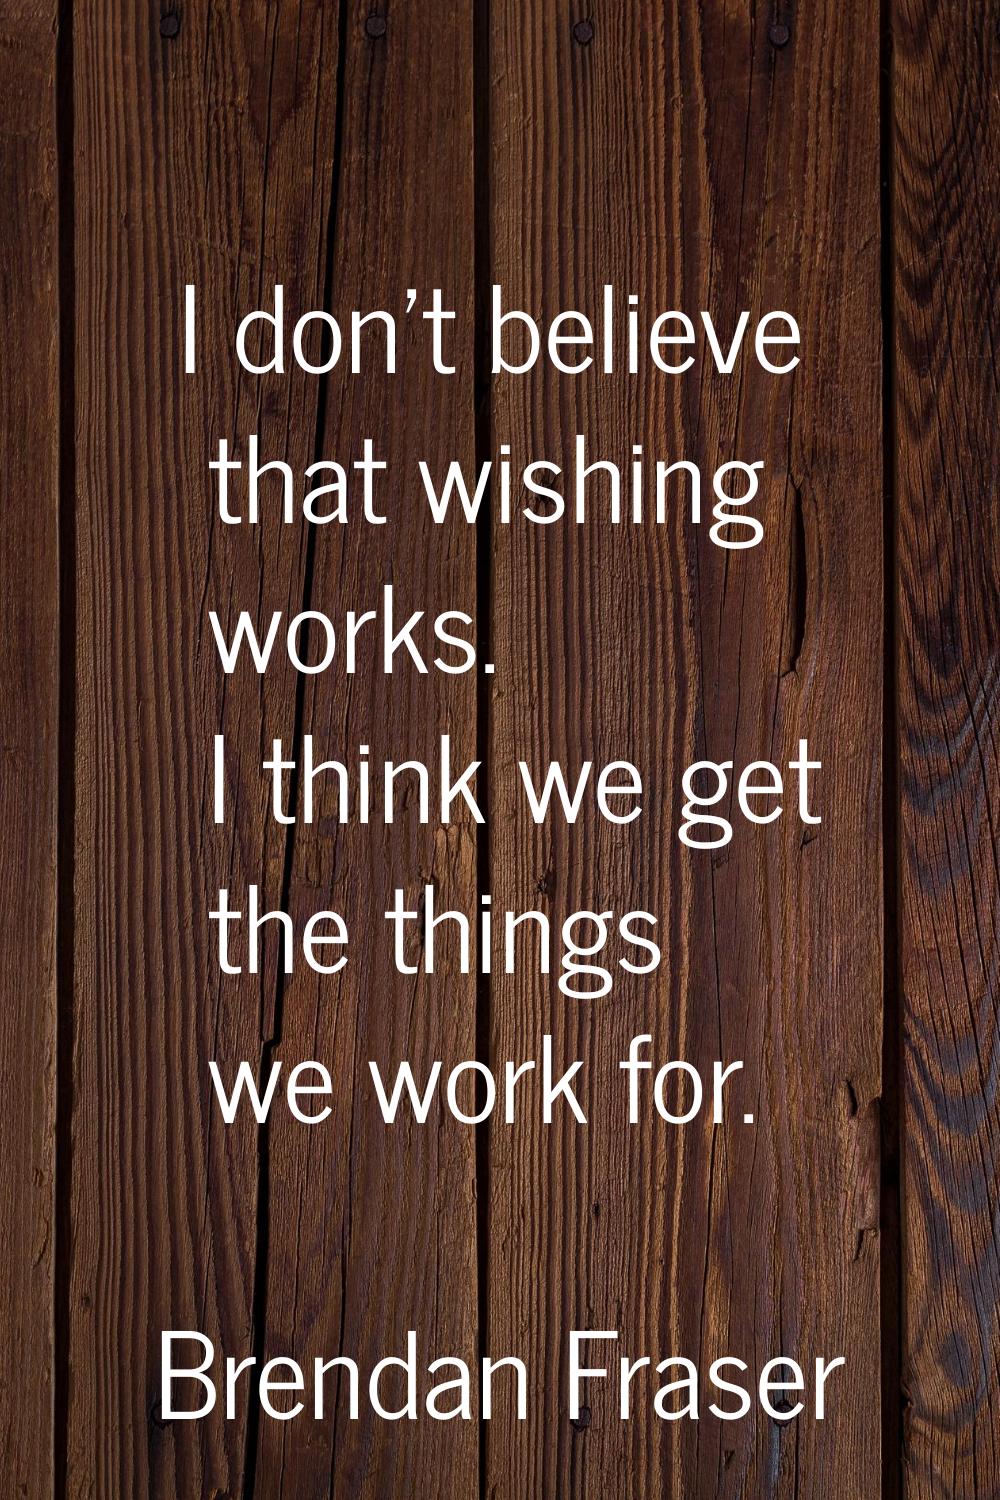 I don't believe that wishing works. I think we get the things we work for.